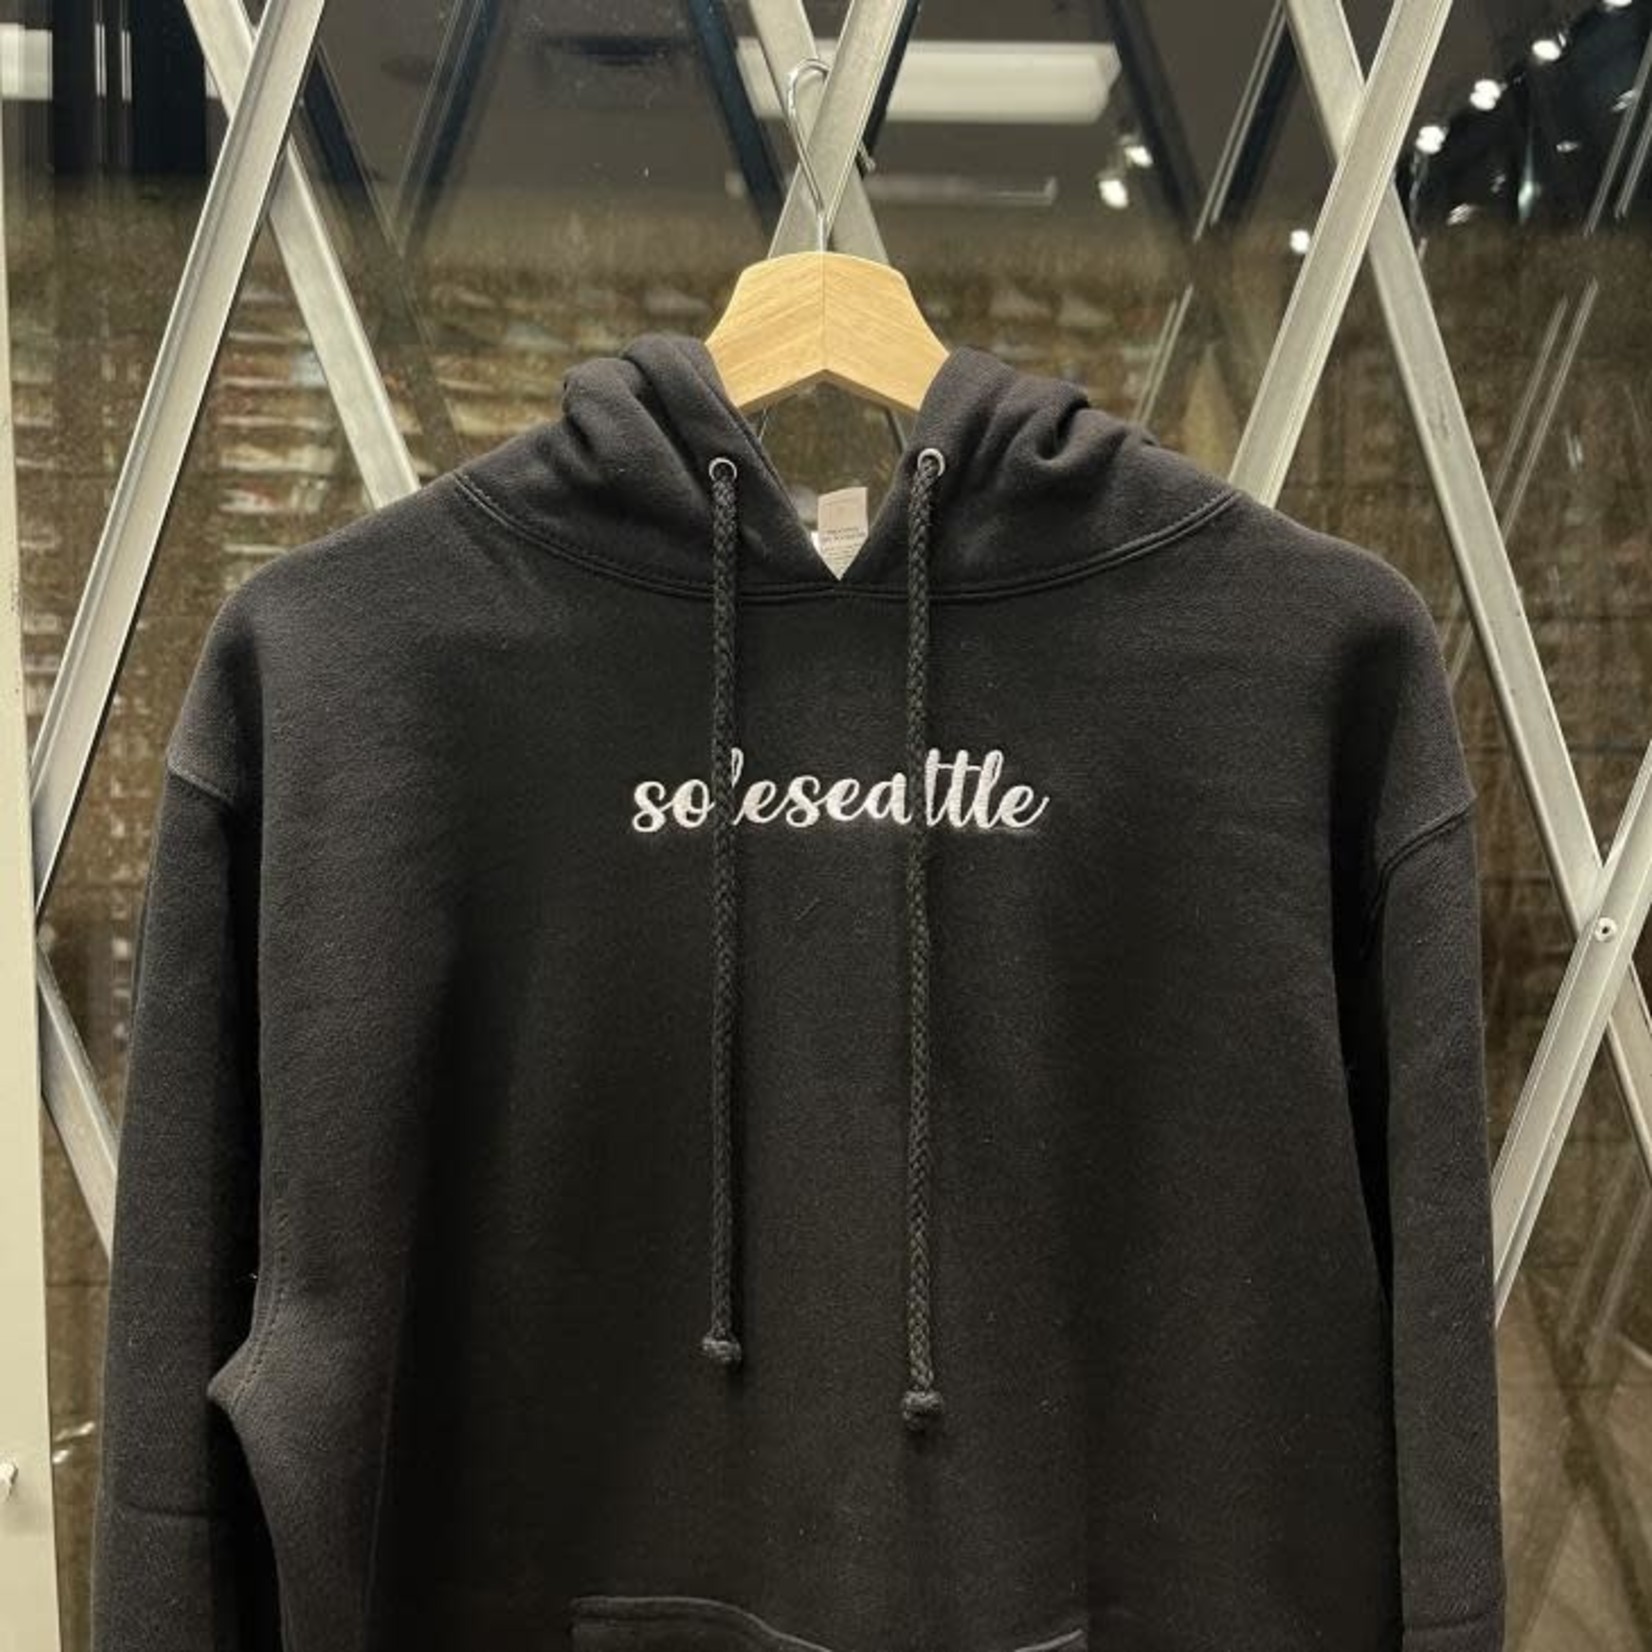 SOLESEATTLE SOLESEATTLE HOODIE BLACK Size Small, DS BRAND NEW